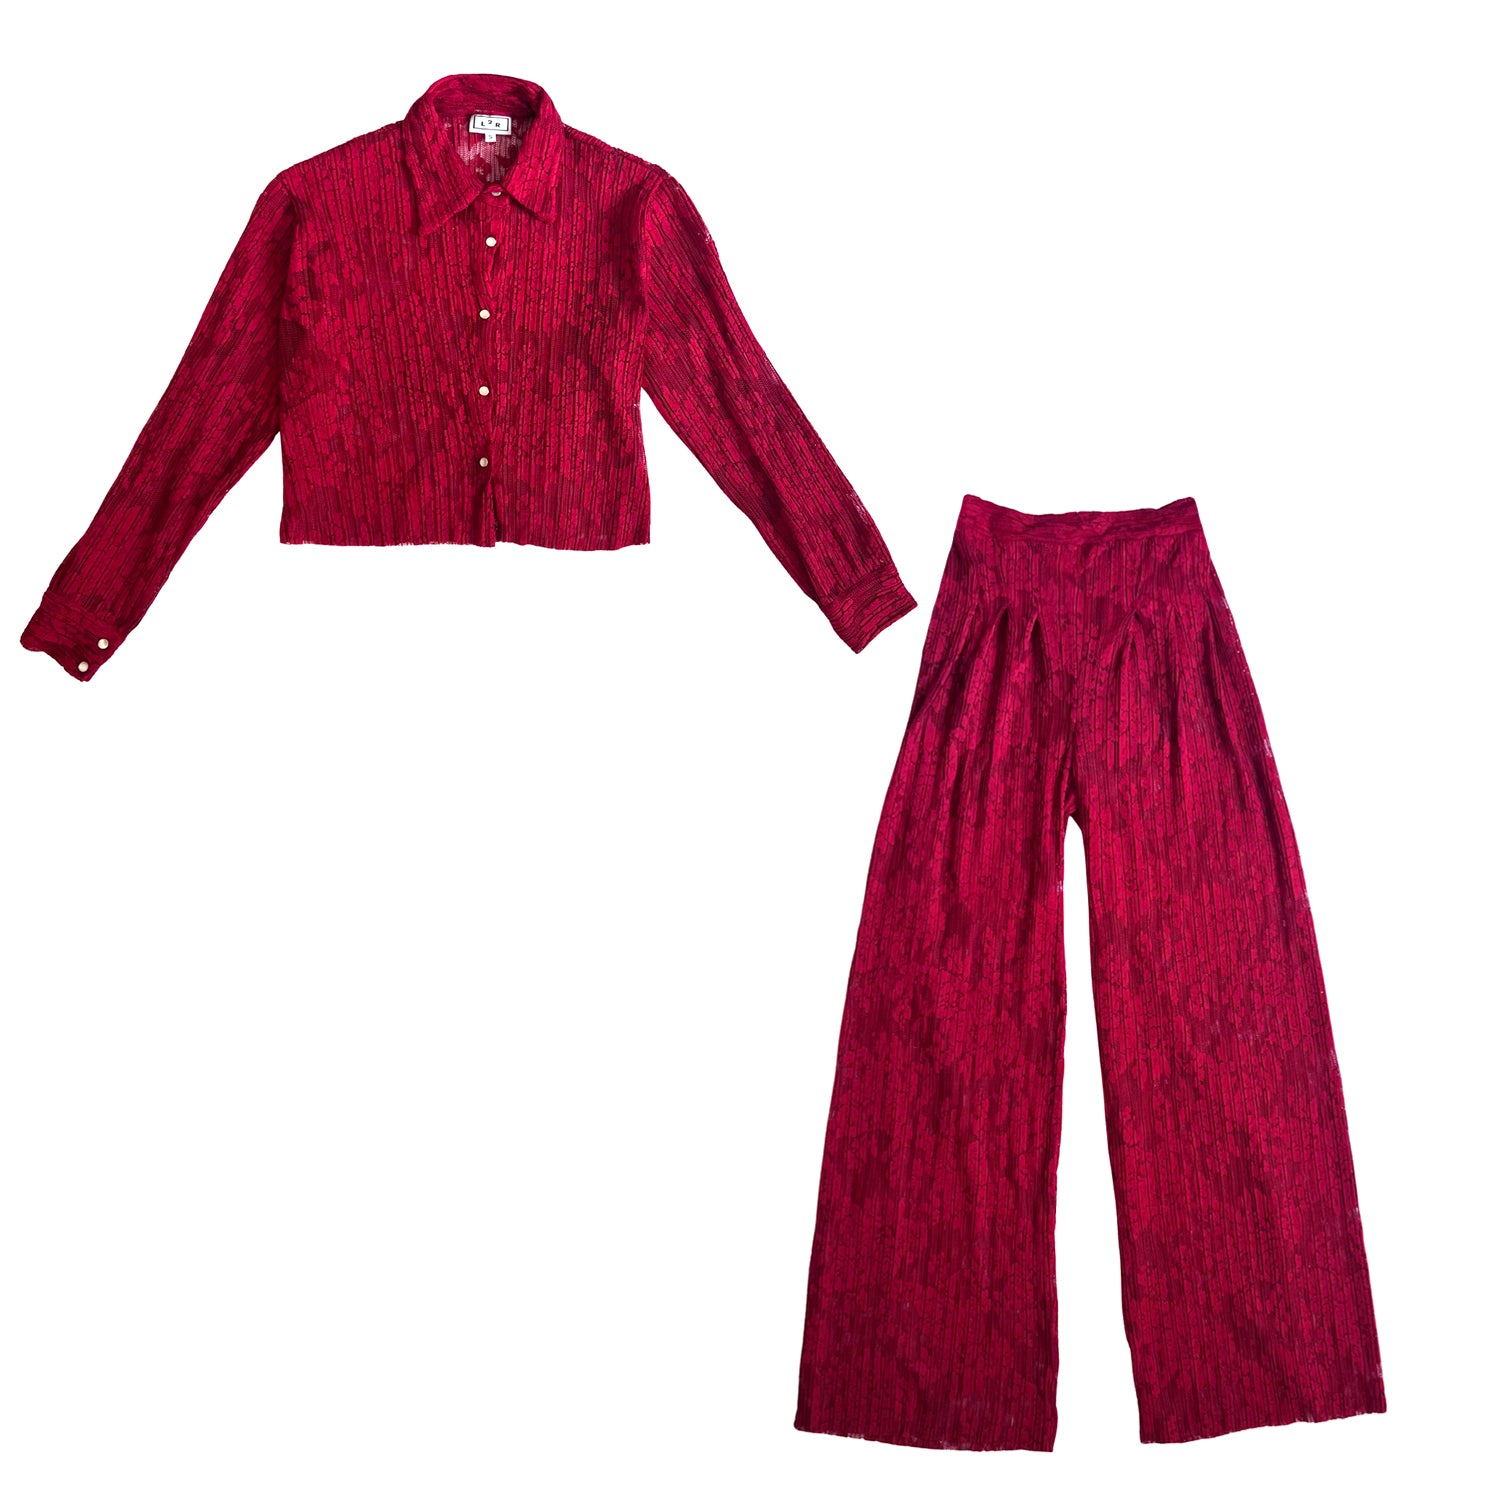 Shirt & Wide-Leg Pants Set in Red Lace